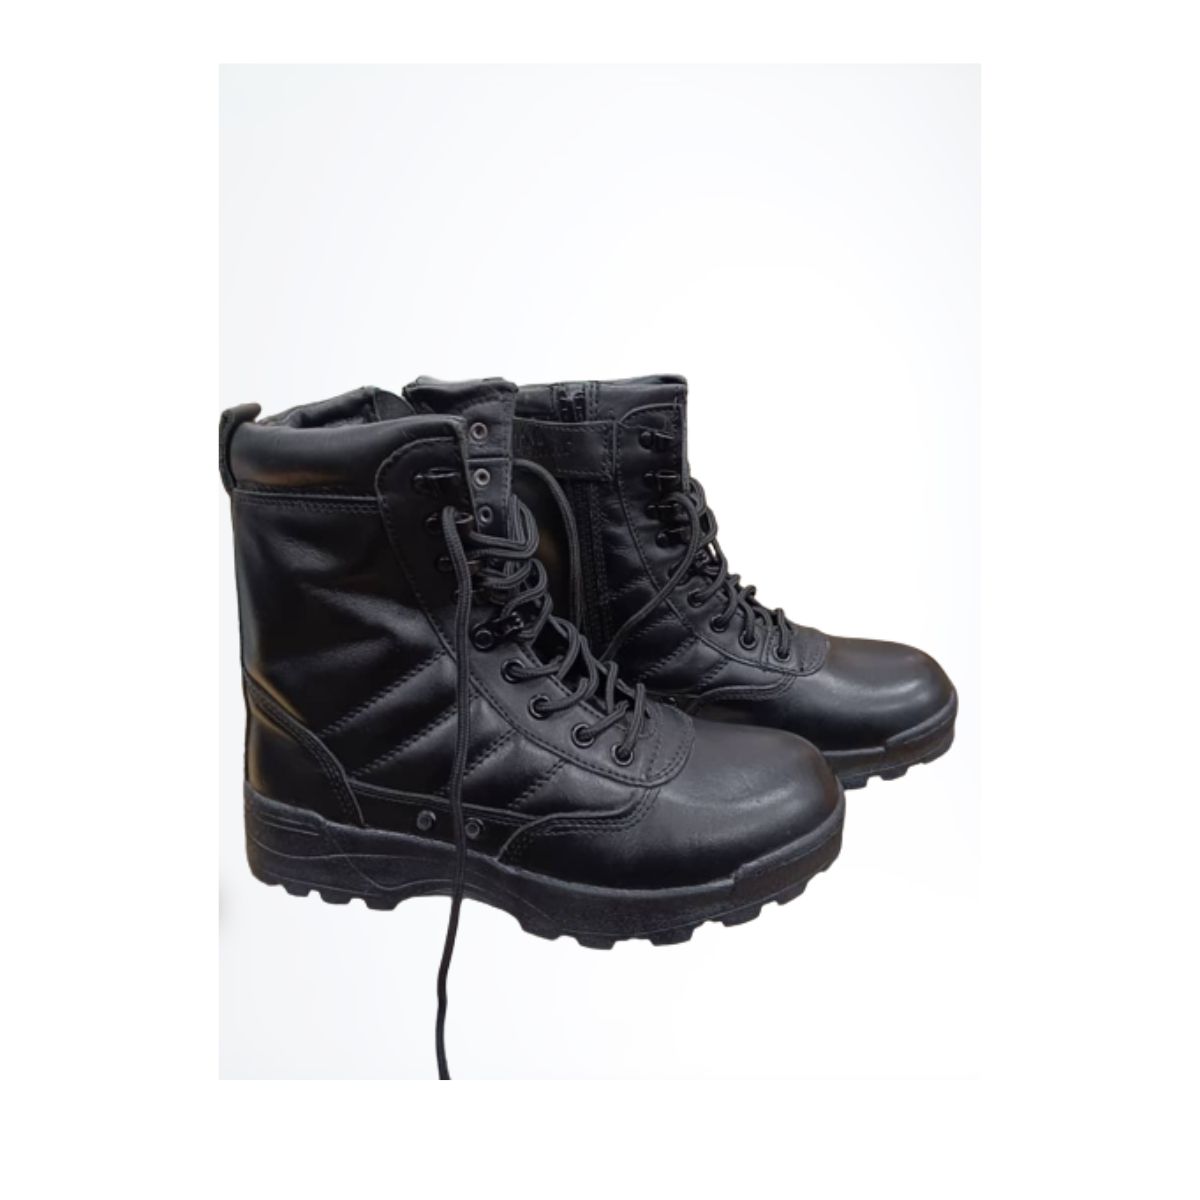 Tactical Boot - Black - Size 39